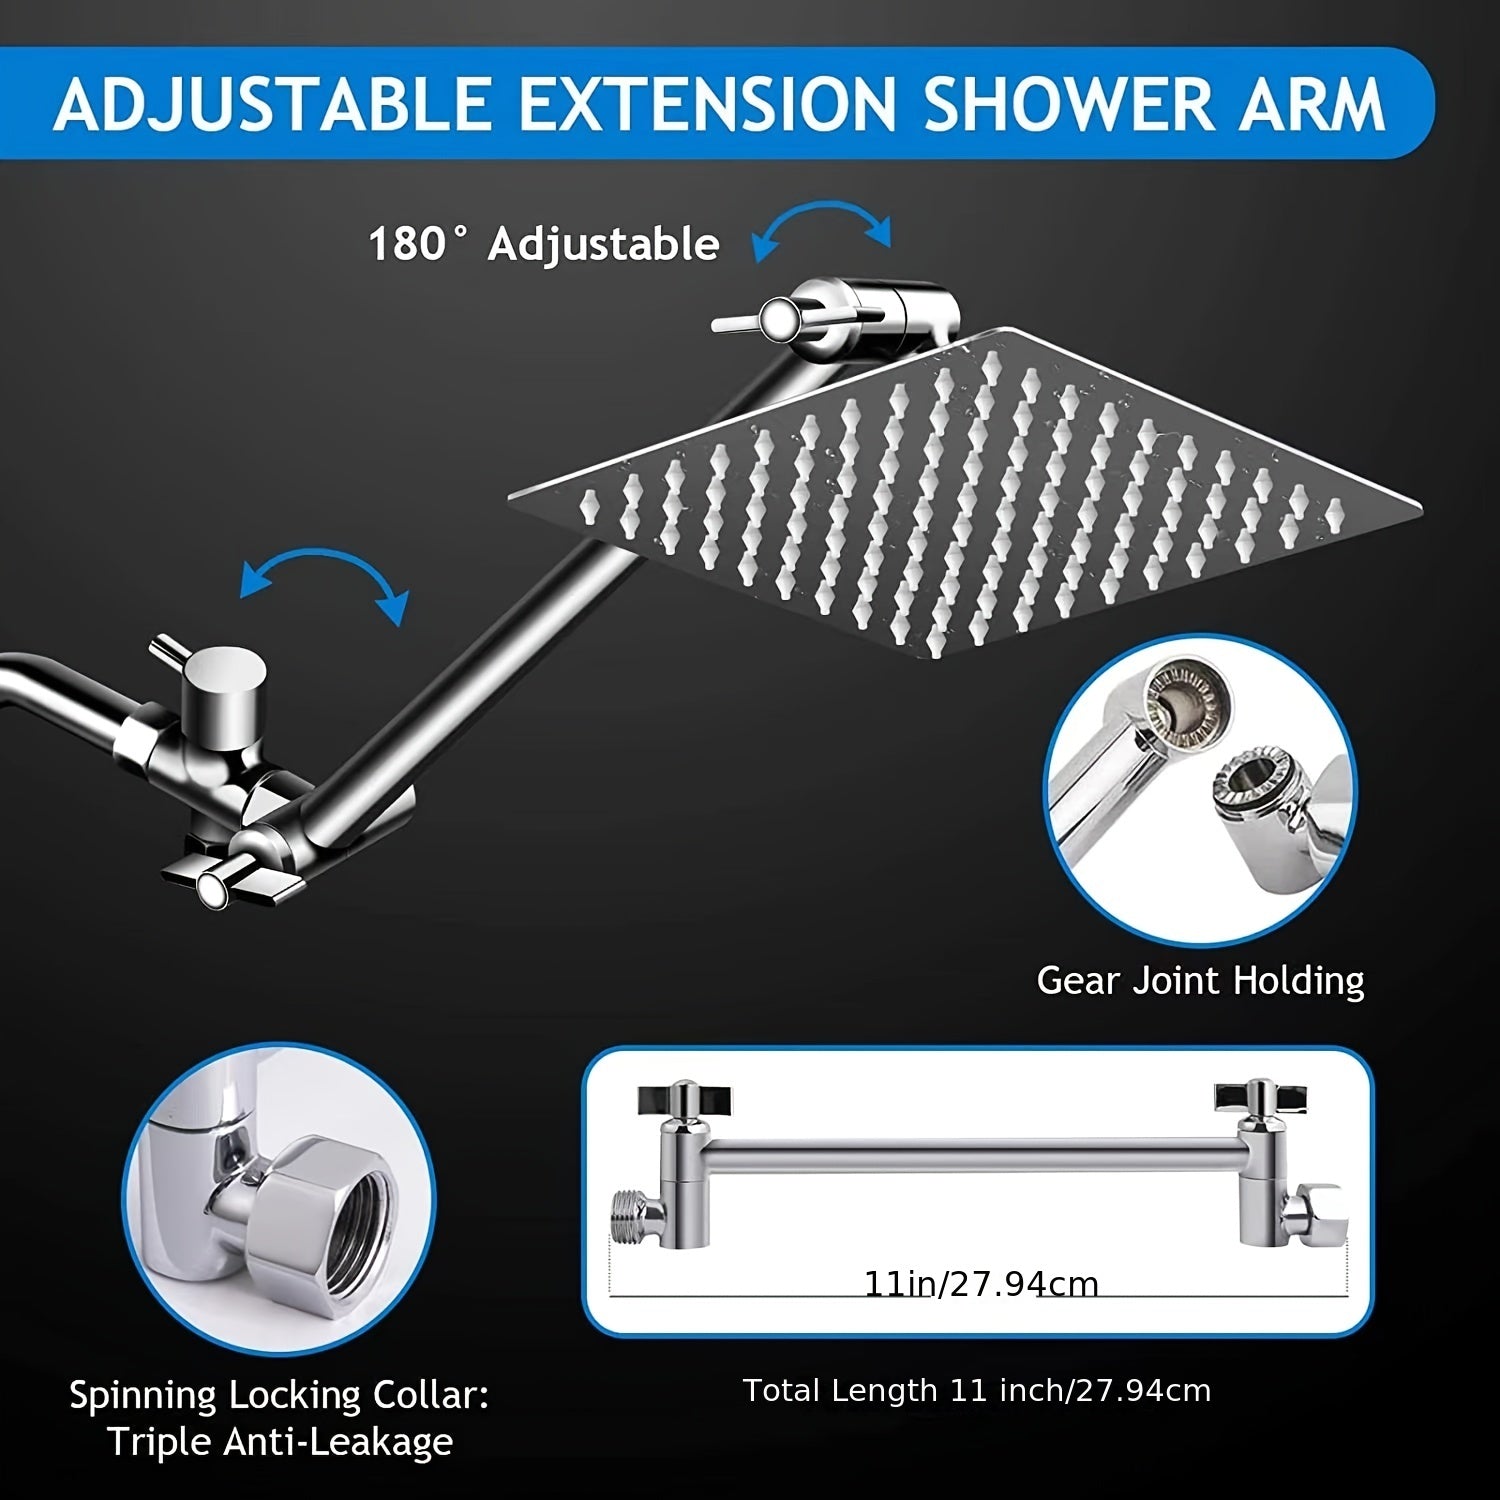 1set Shower Head With Handheld, High Pressure Rain Shower Head With 11 Inch Extension Arm, 5-mode Adjustable Leak Proof Shower Head With Bracket/hose, Height/Angle Adjustable ➡ BF-00003